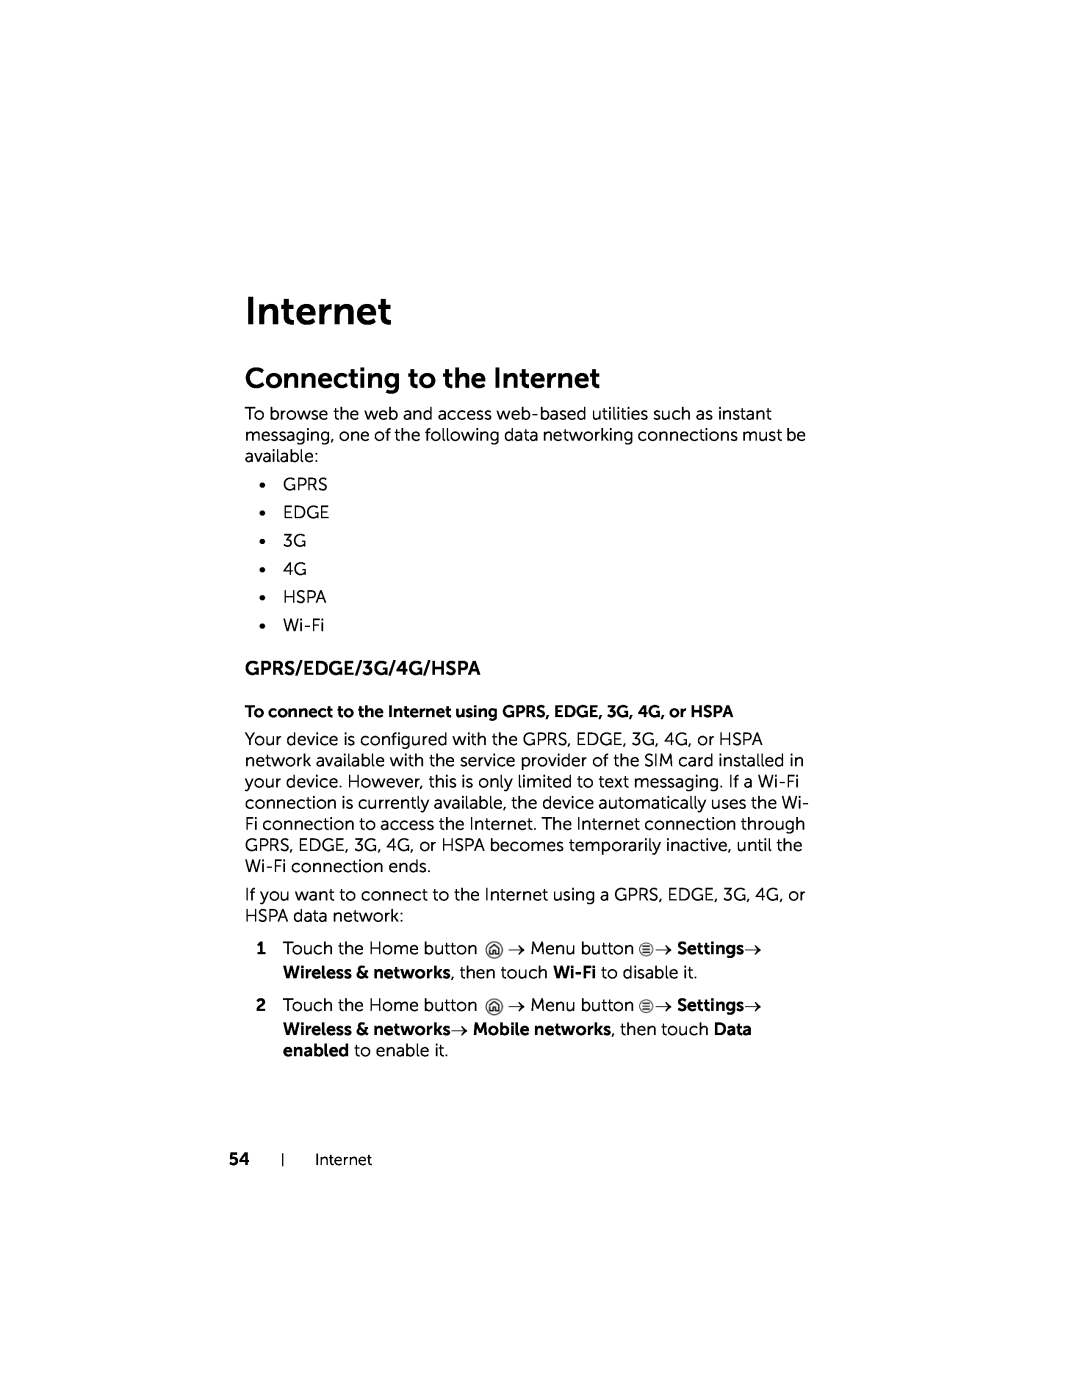 Dell 7 user manual Connecting to the Internet, GPRS/EDGE/3G/4G/HSPA 